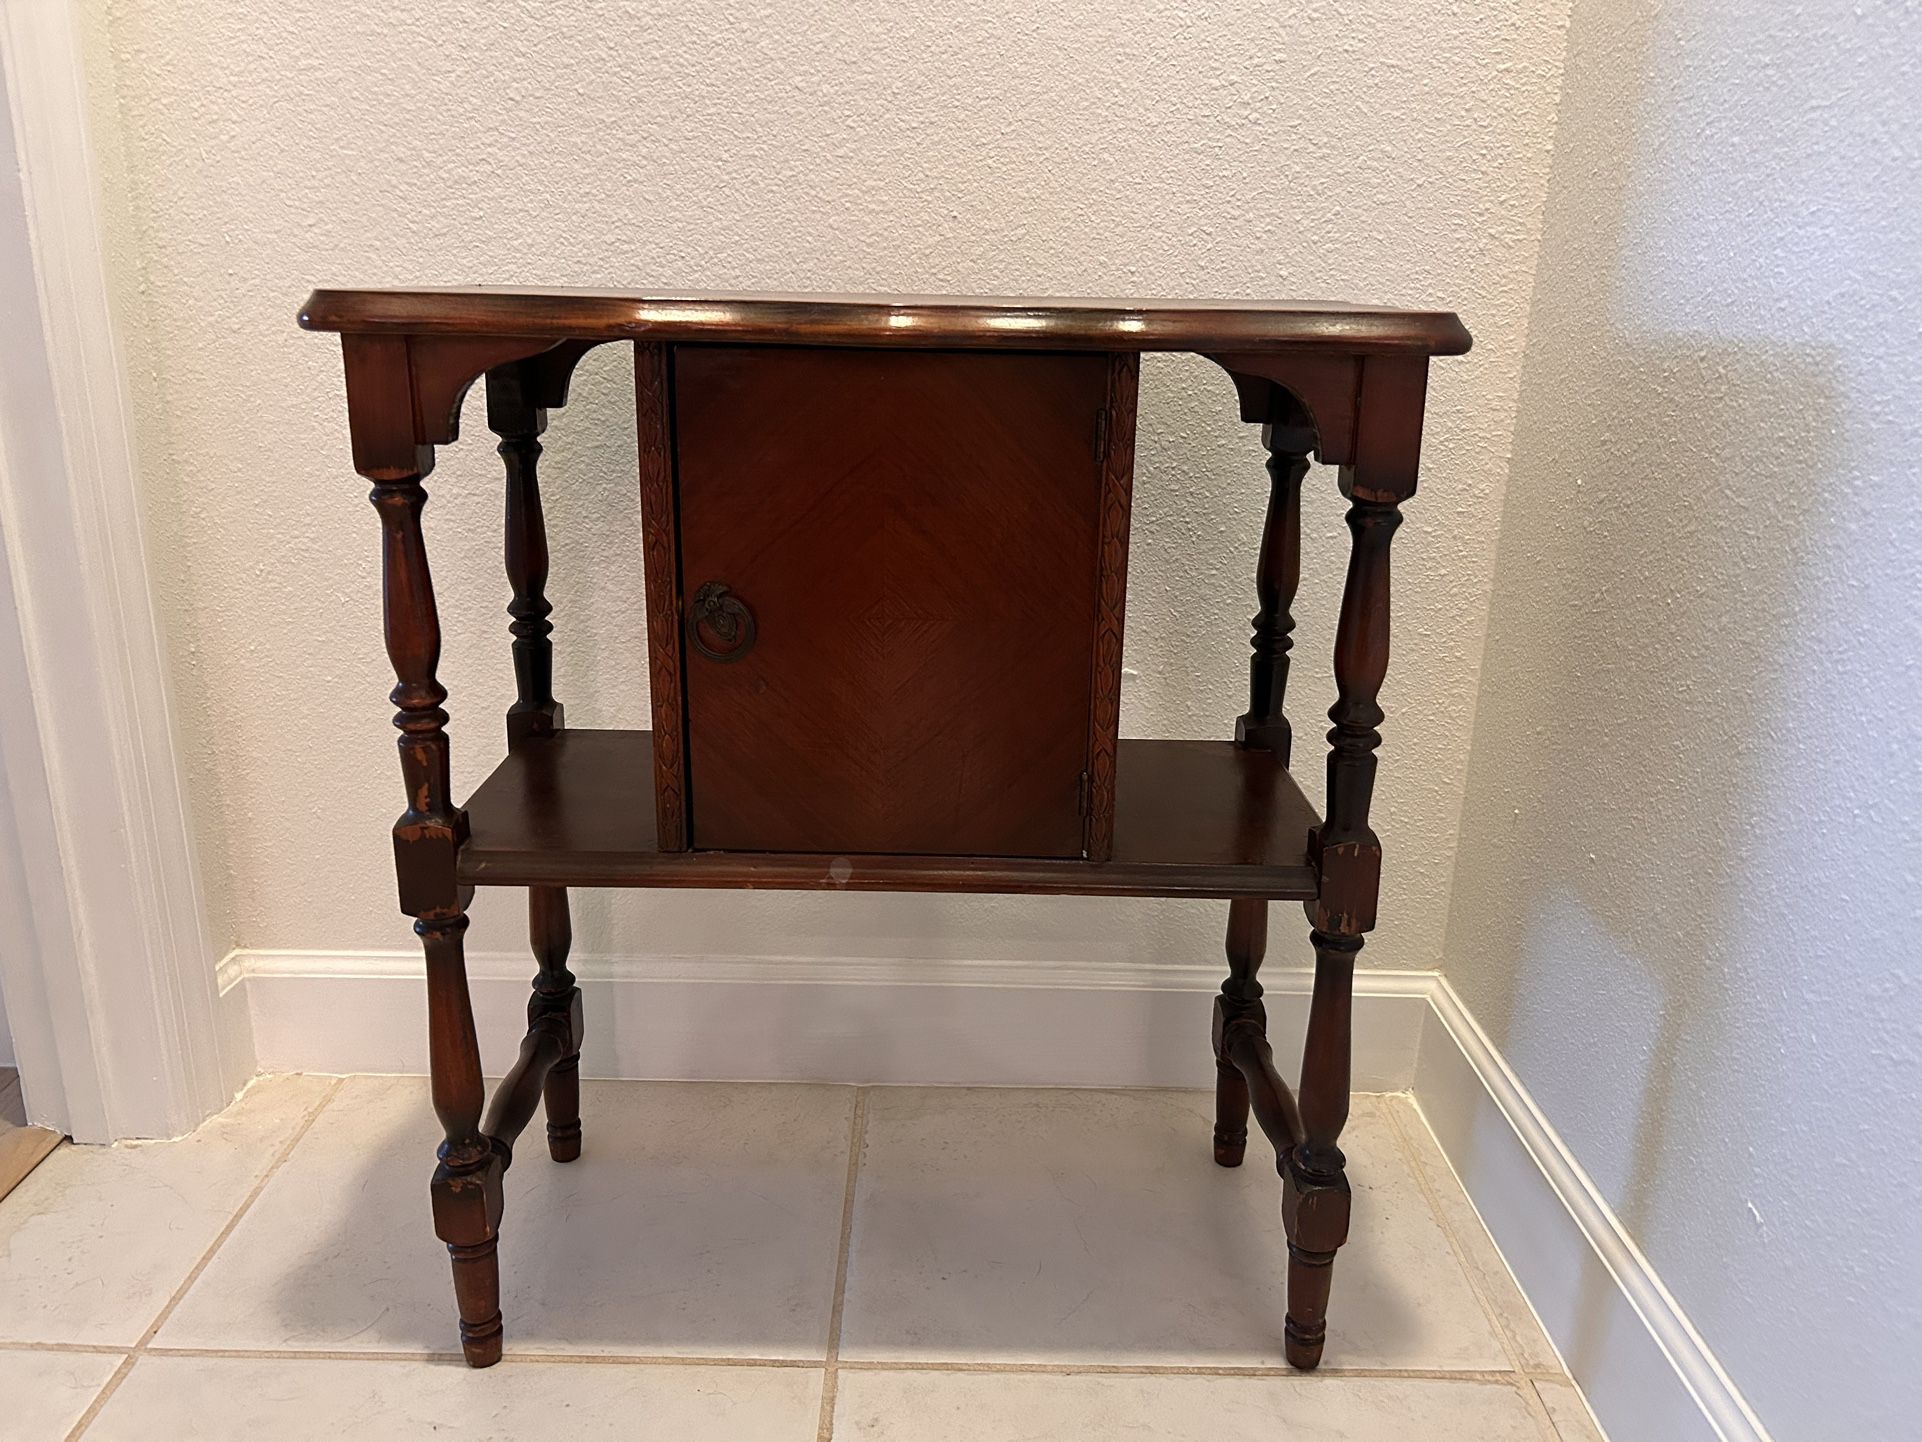 Antique Humidor Side Table